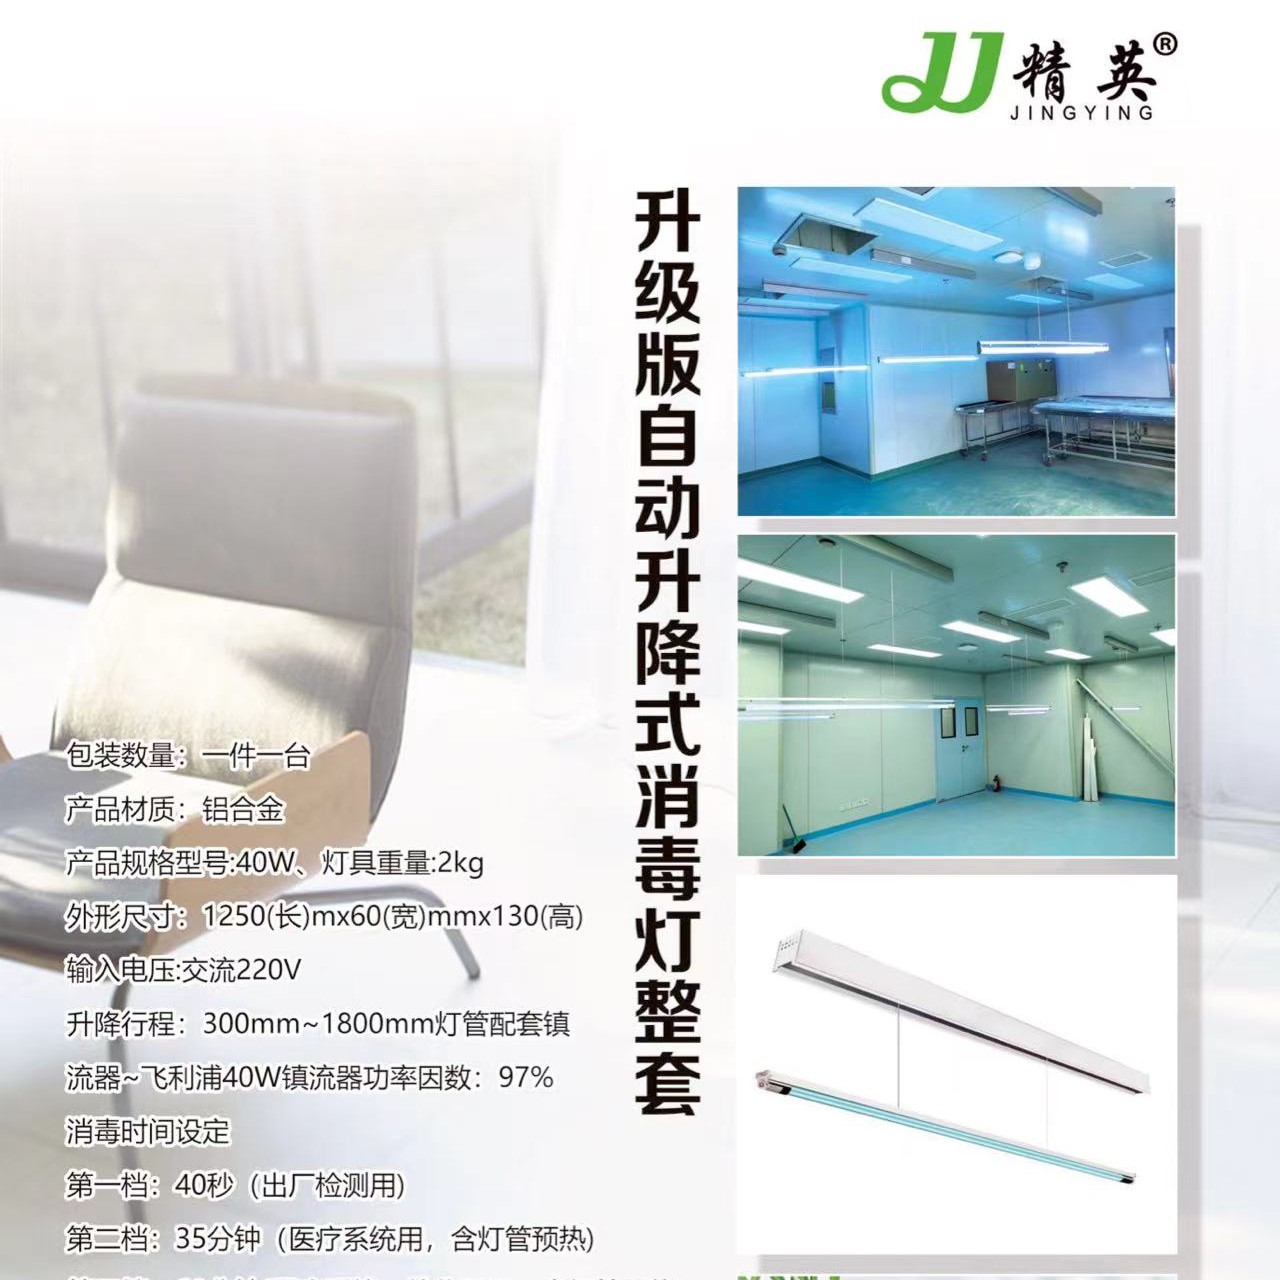 Upgraded automatic lifting germicidal lamp complete set